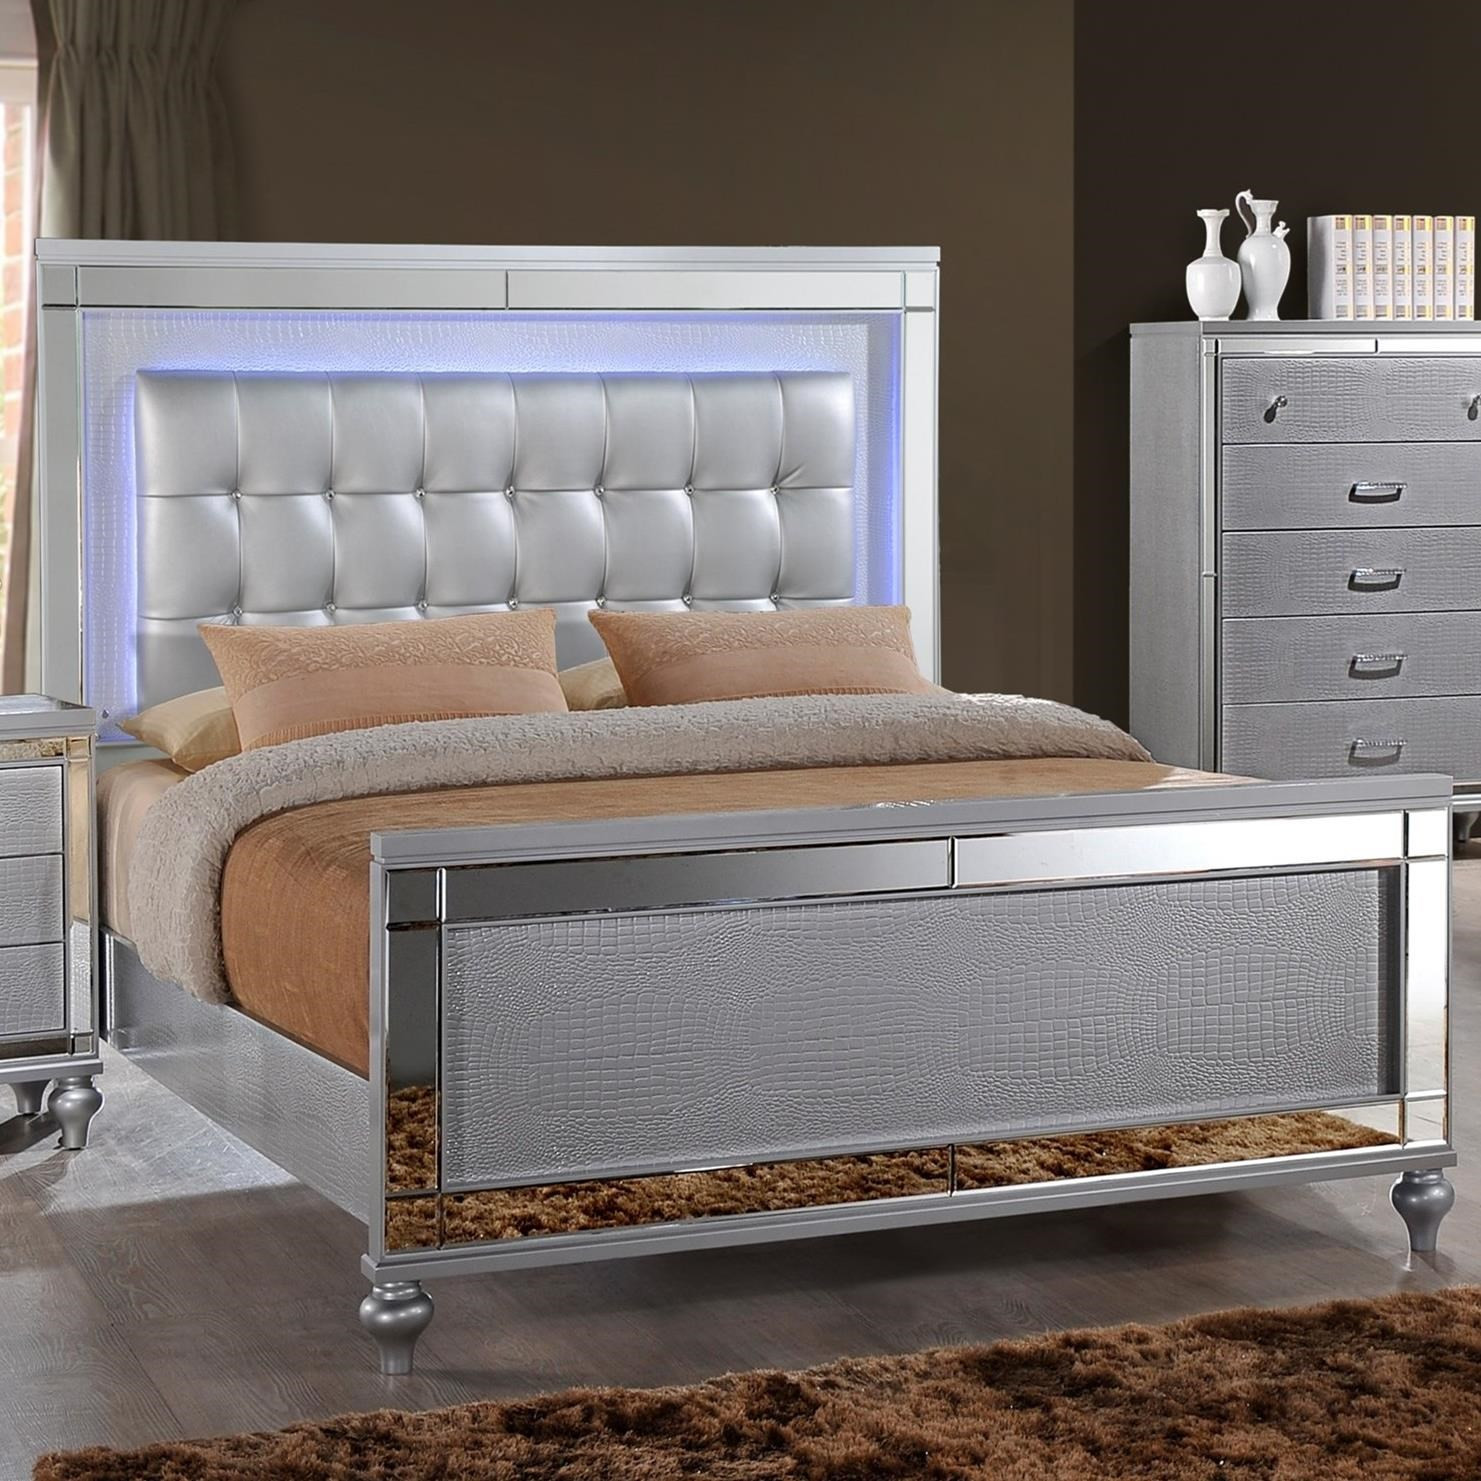 Lighted Headboard Bedroom Set
 King Bed with Tufted Upholstered Headboard and LED